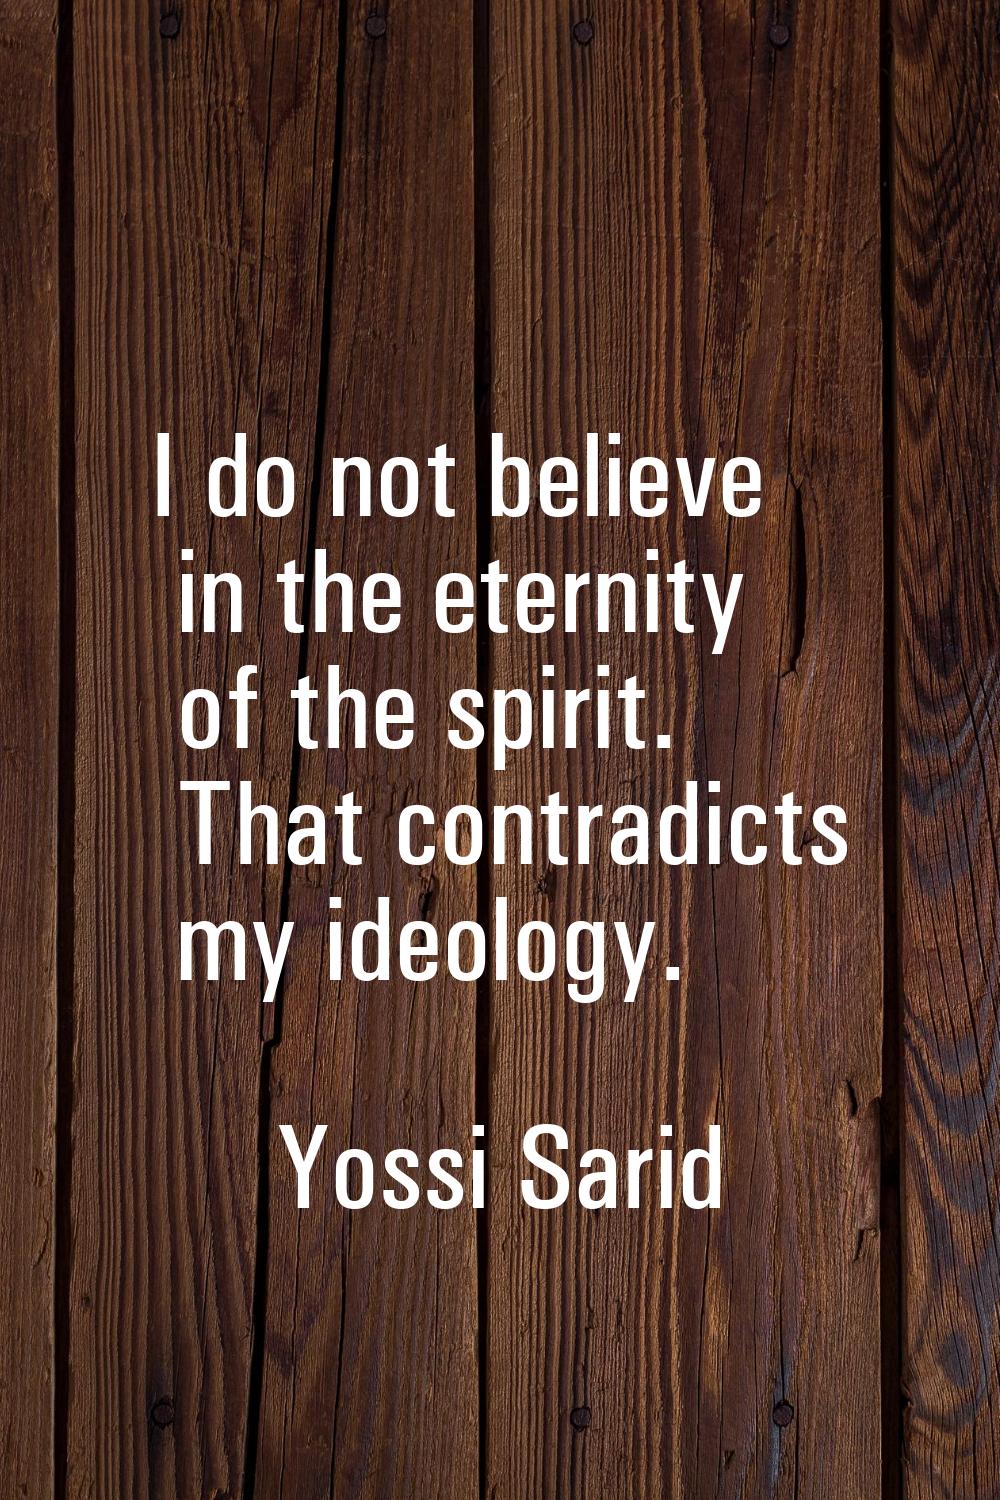 I do not believe in the eternity of the spirit. That contradicts my ideology.